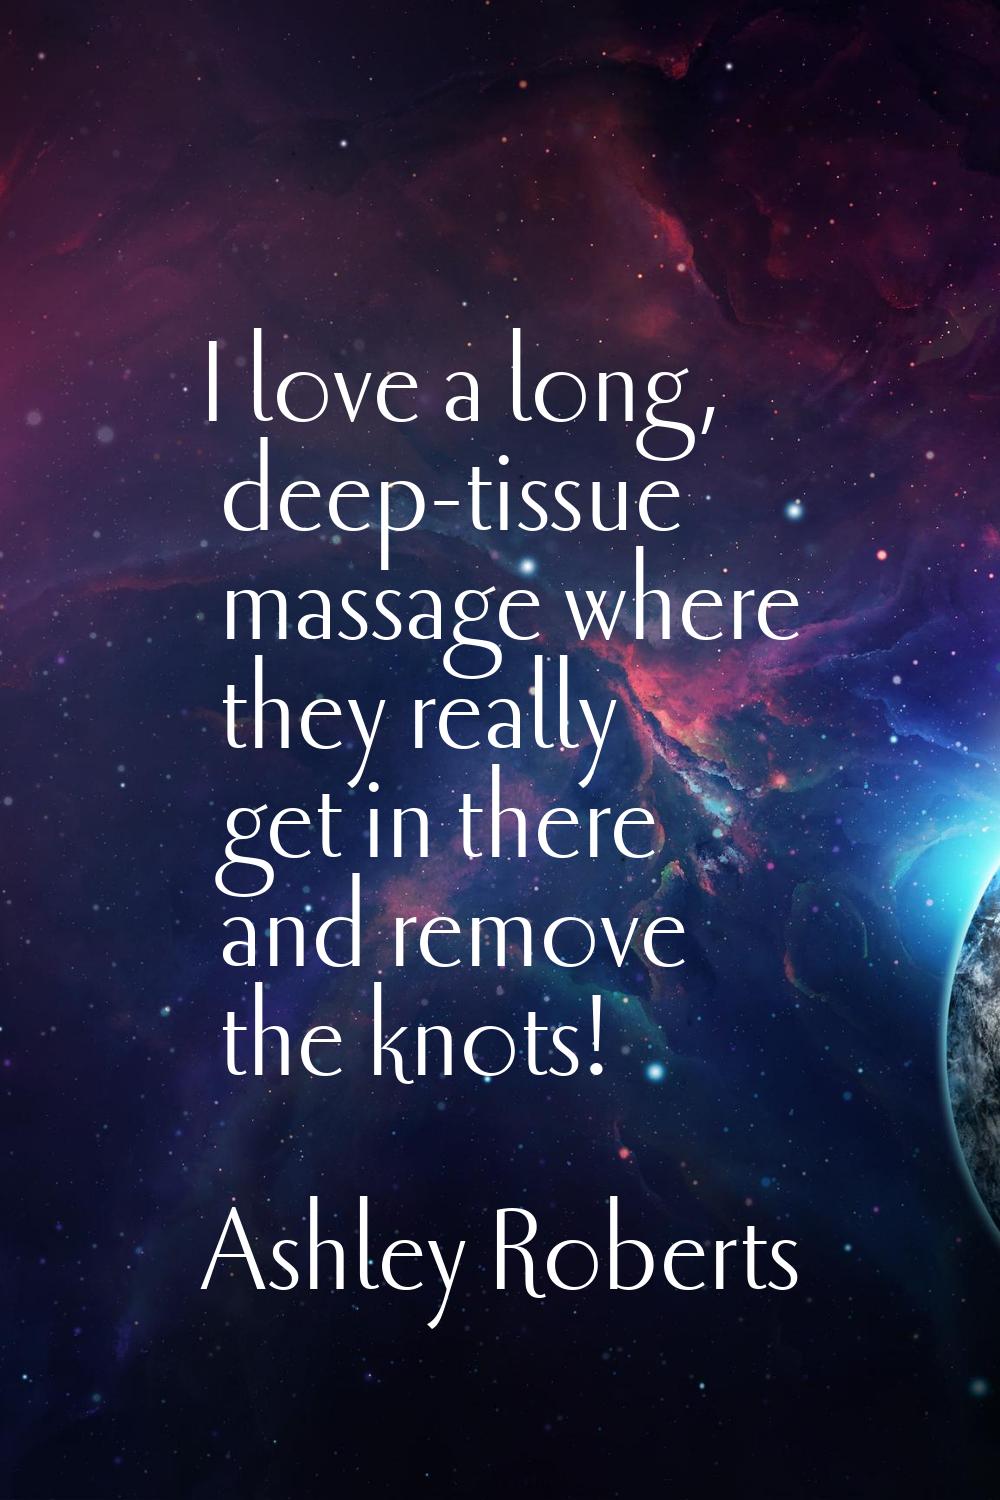 I love a long, deep-tissue massage where they really get in there and remove the knots!